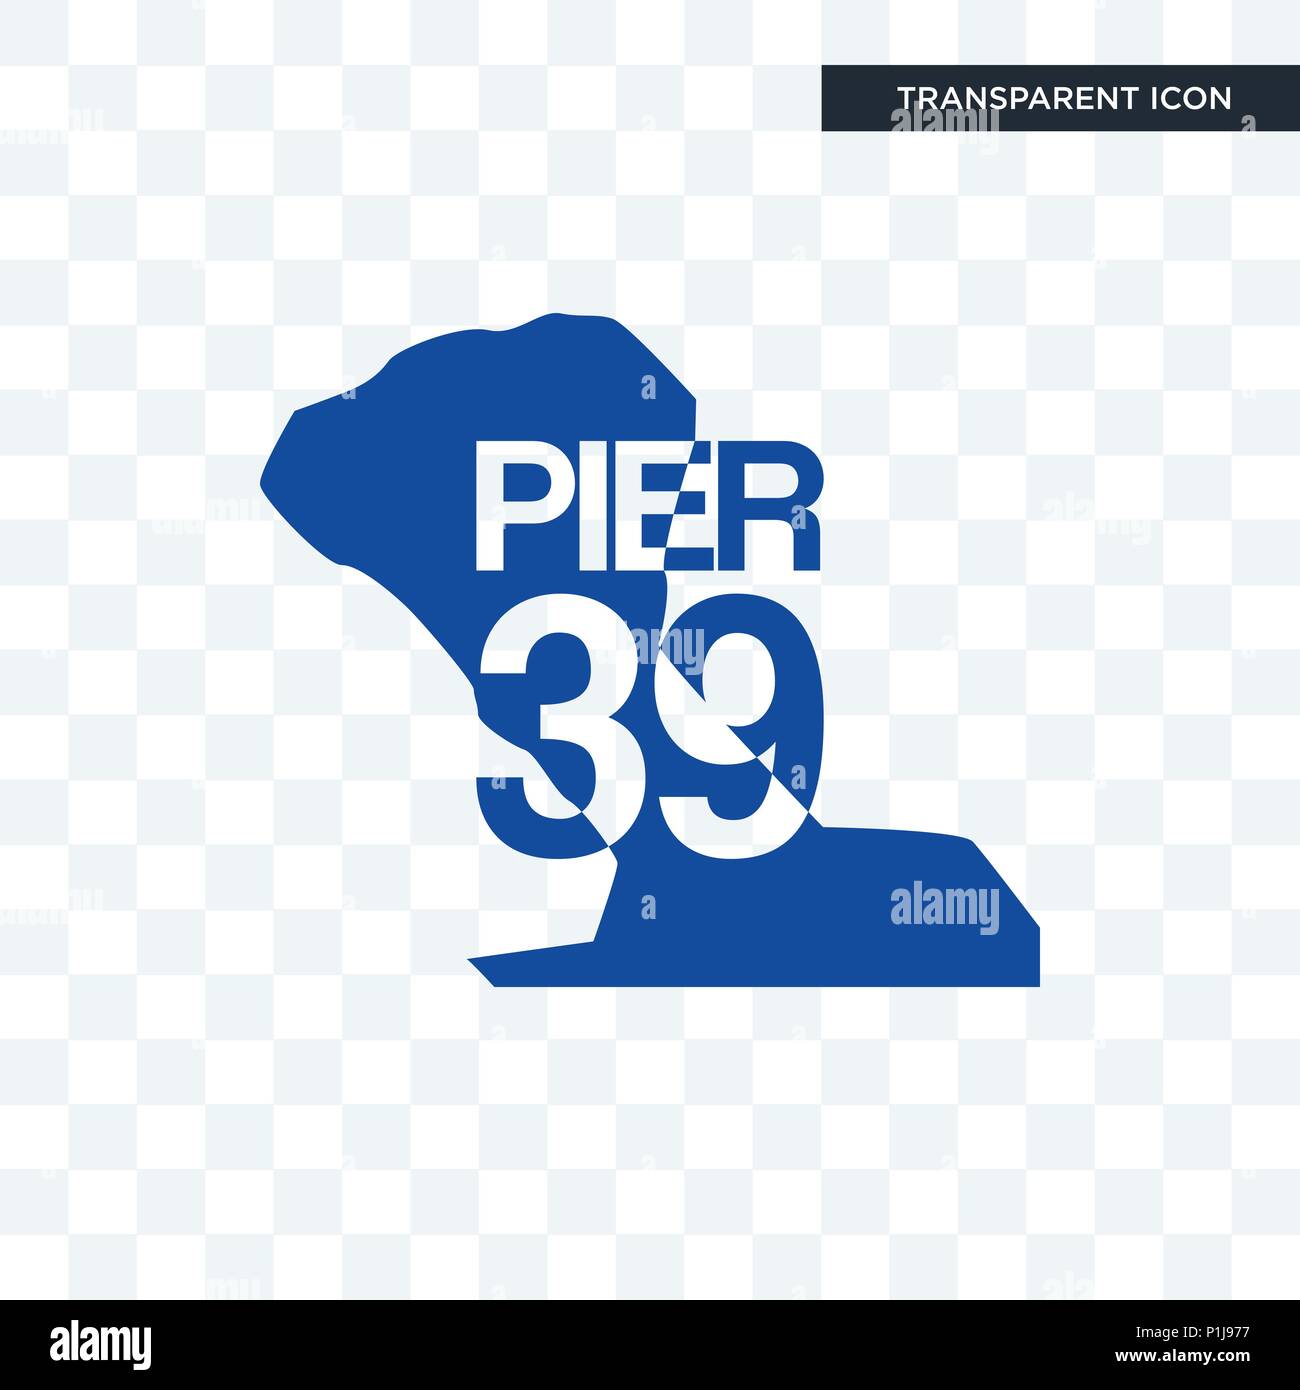 pier 39 vector icon isolated on transparent background, pier 39 logo concept Stock Vector